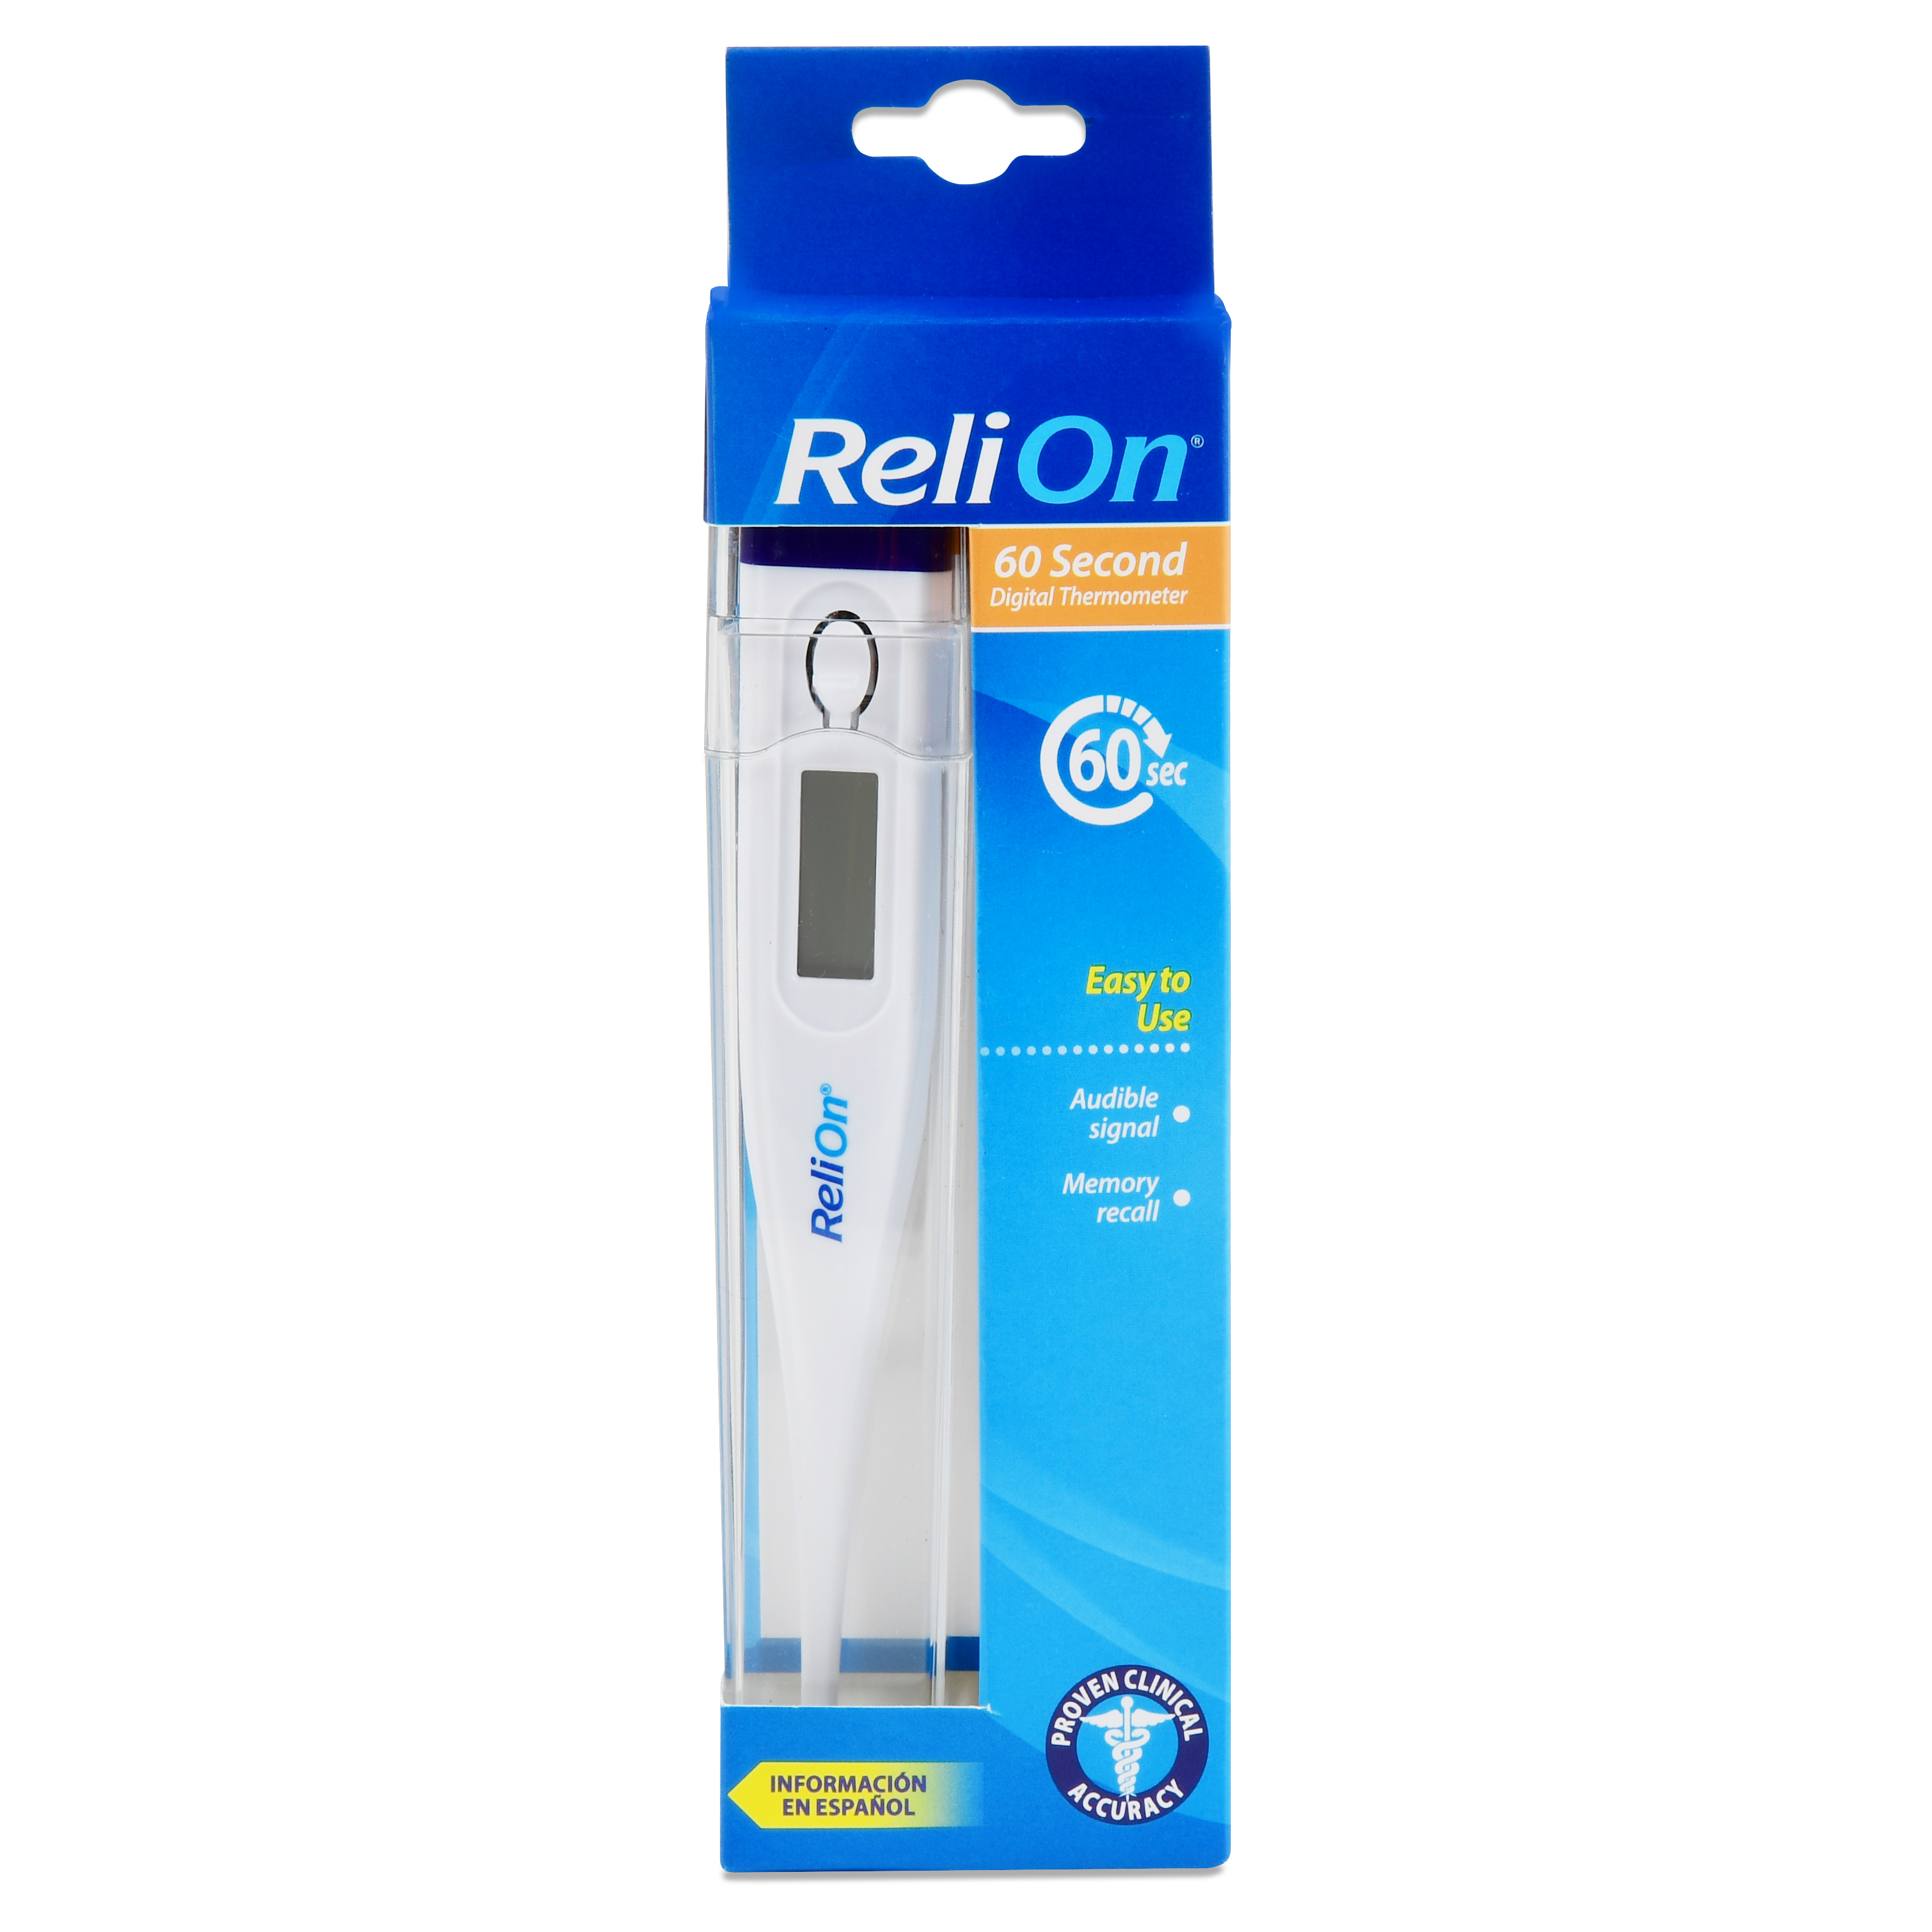 ReliOn 60 Second Digital Thermometer - image 1 of 8